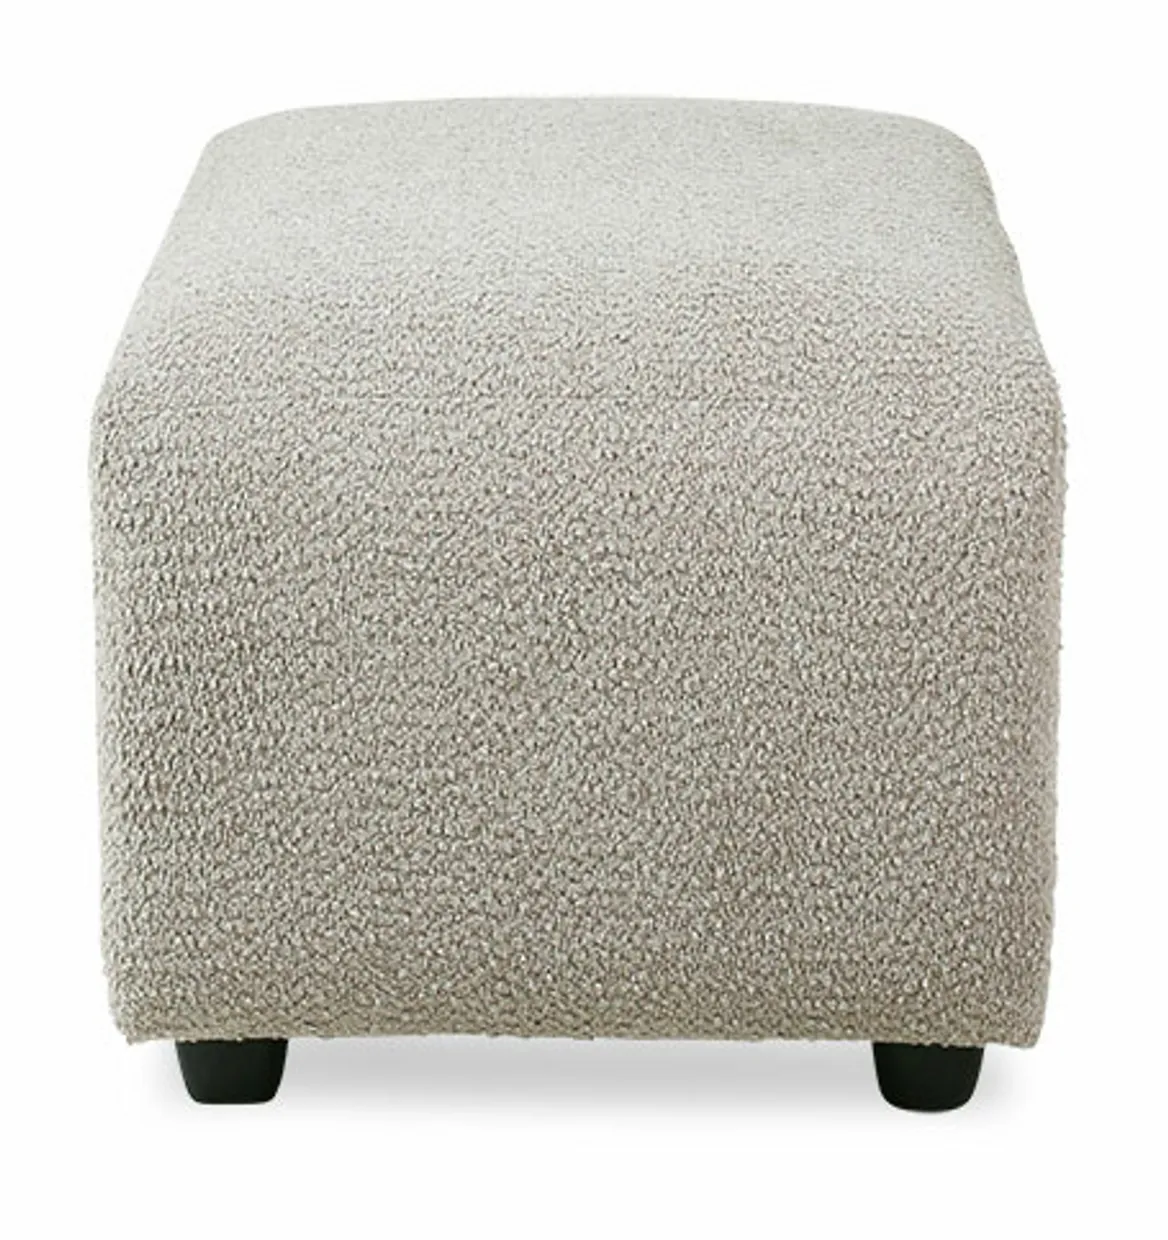 Jax couch: element hocker small, ted, stone